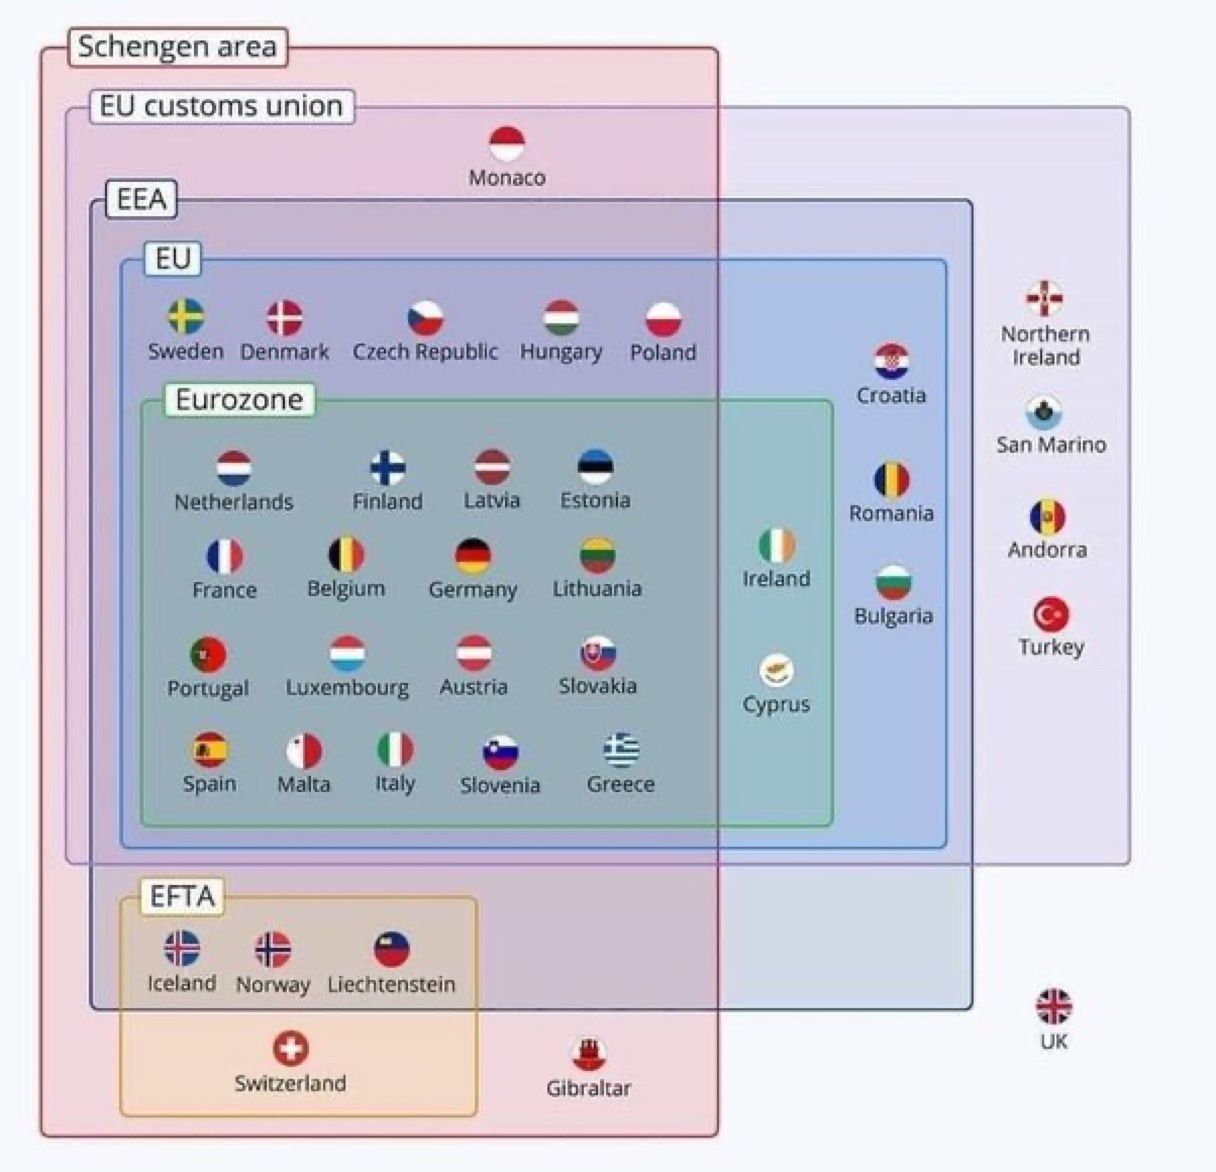 Overview of different European organisations